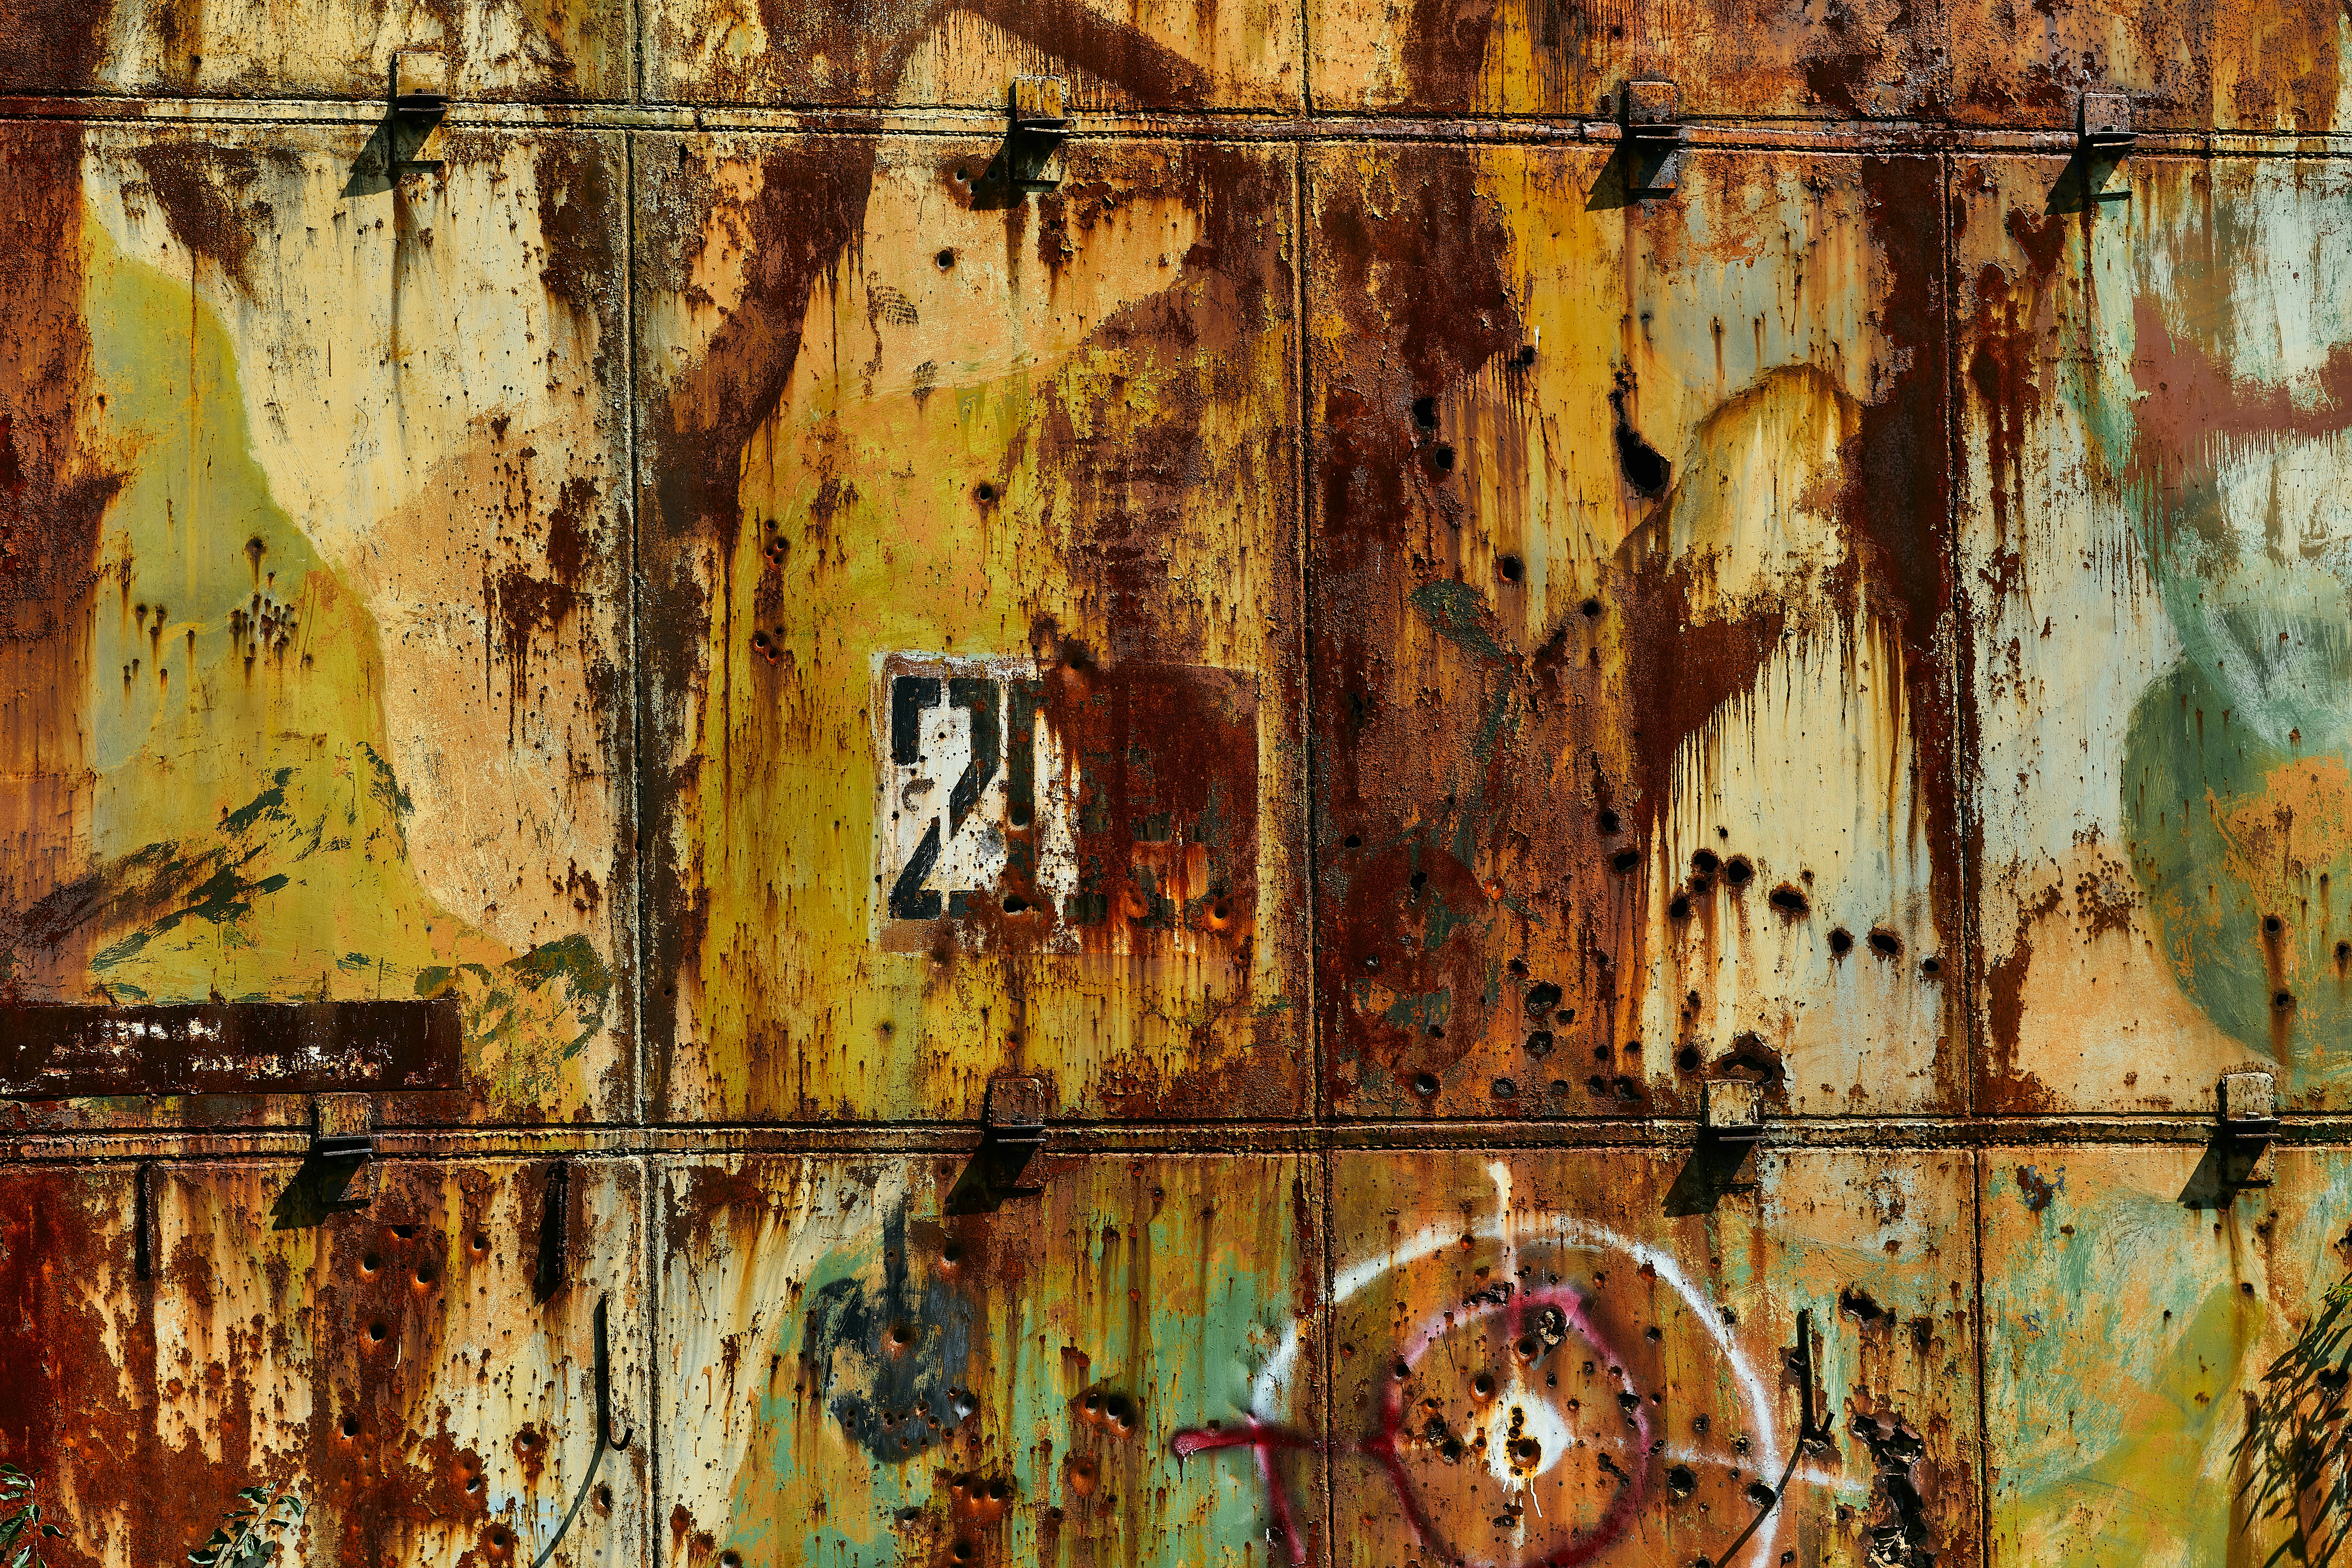 Messy horizontal grunge metal background for websites, design, photoshop and social media. Horizontal metal wall with rust, scratches, gunshot marks, hunting target, number 203, splashes of orange, yellow, white and green paint